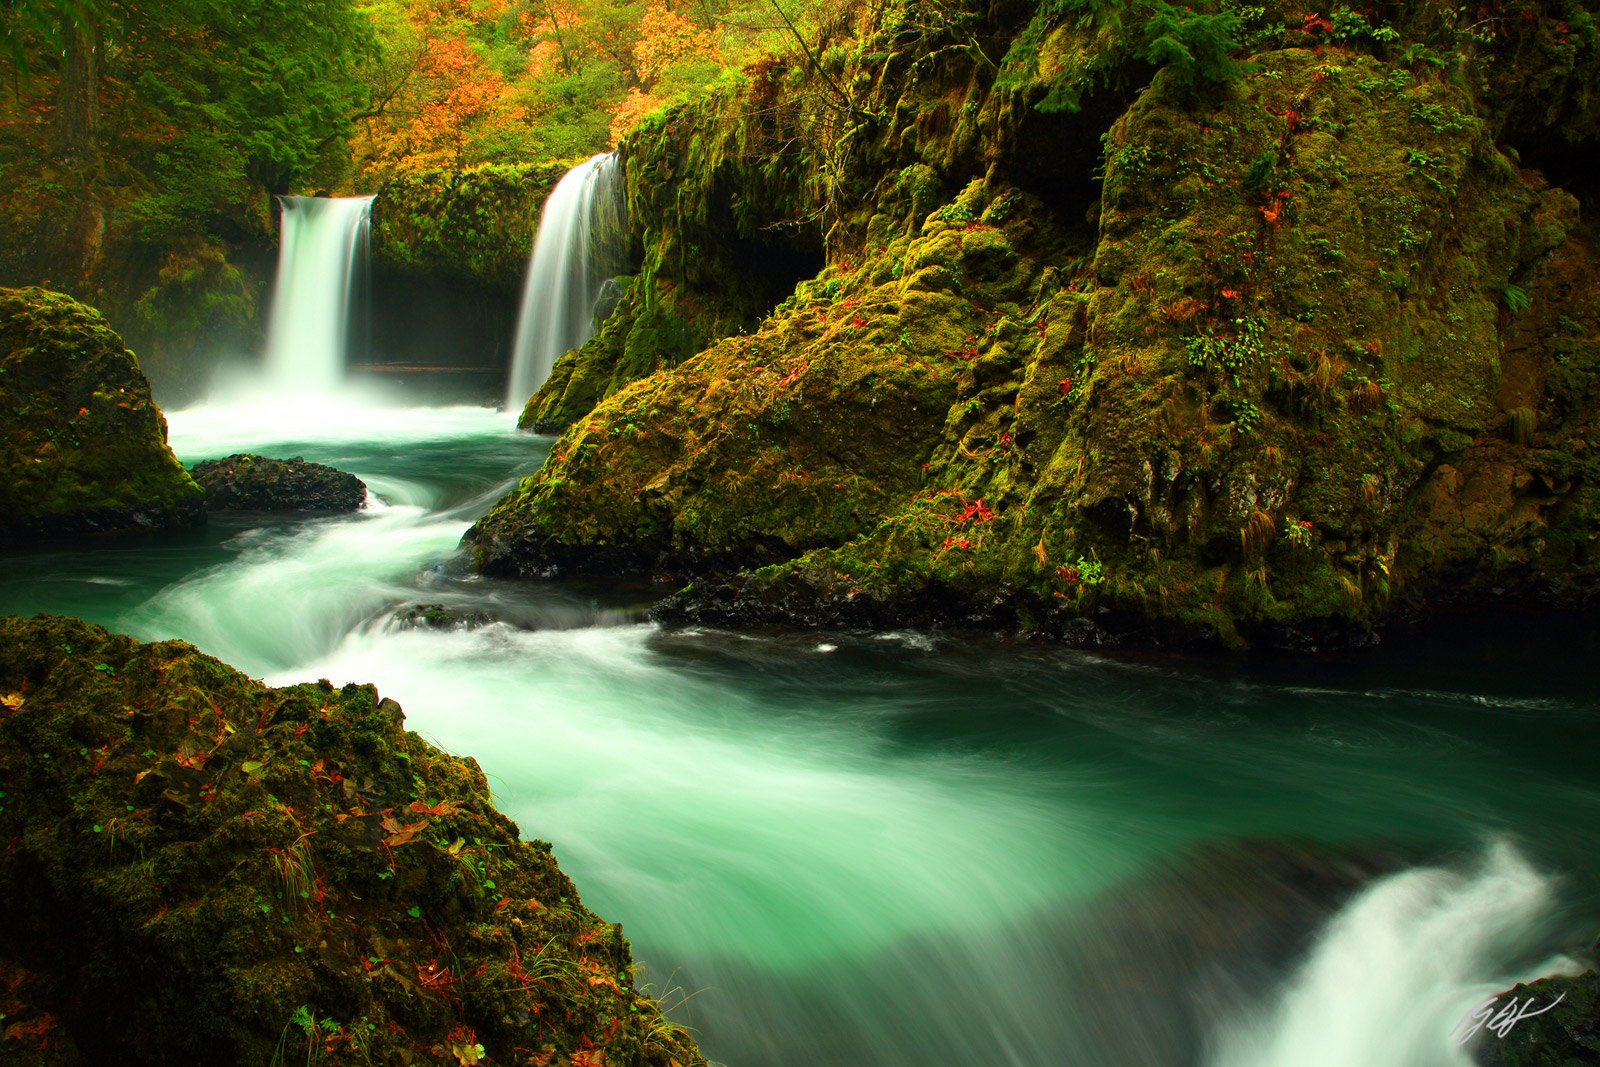 The Emerald Green Water of Spirit Falls in Fall in the Columbia River Gorge in Washington